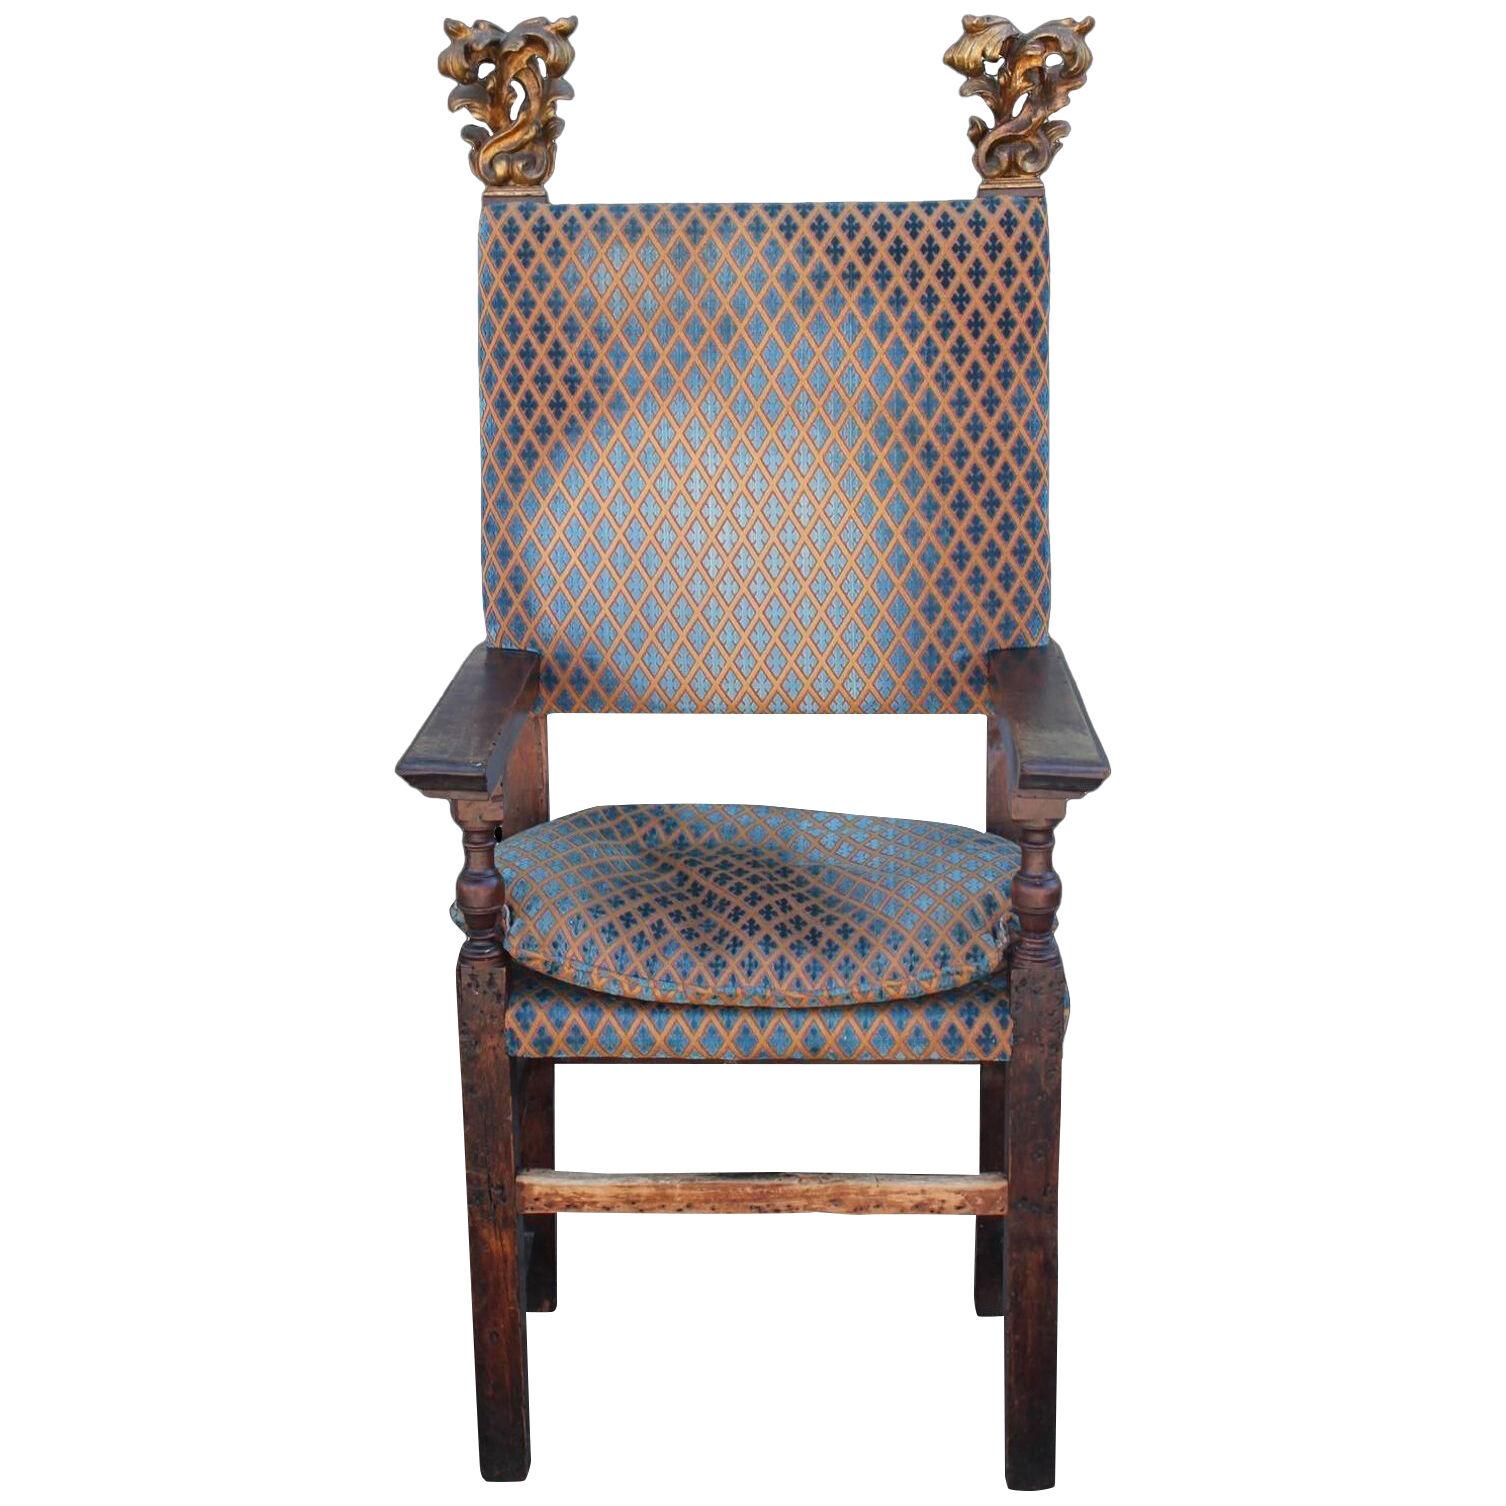 17th 18th Century Spanish / Italian Gilt Throne Chair with Gold Painted Finials